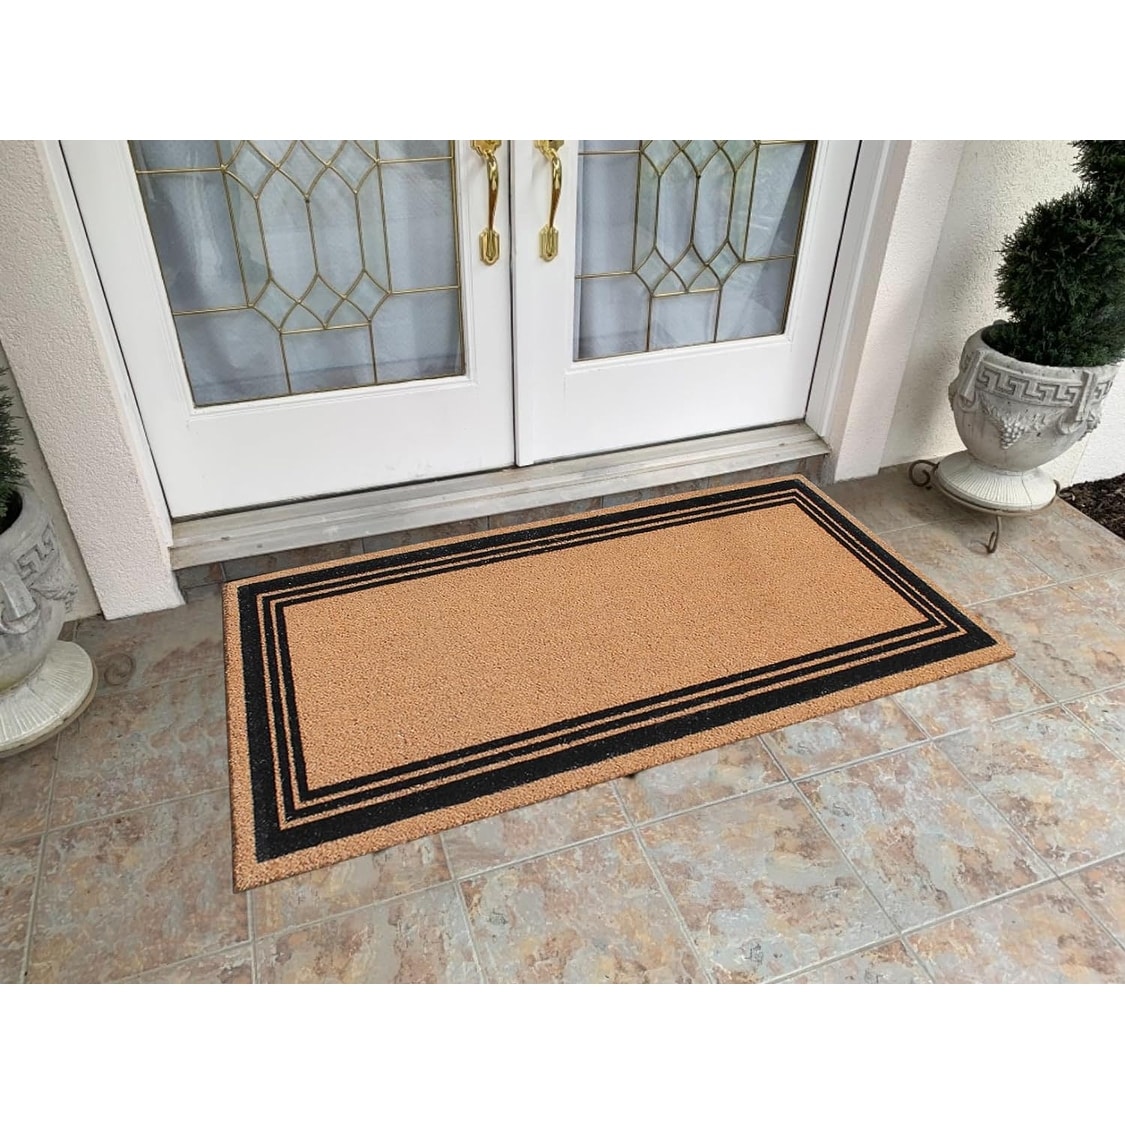 https://ak1.ostkcdn.com/images/products/is/images/direct/eaa4210362bb498385dd29be7ac3097c5ceb3bfa/A1HC-Natural-Coir-Flock-Door-Mat-for-Front-Door%2C-Anti-Shed-Treated-Doormat.jpg